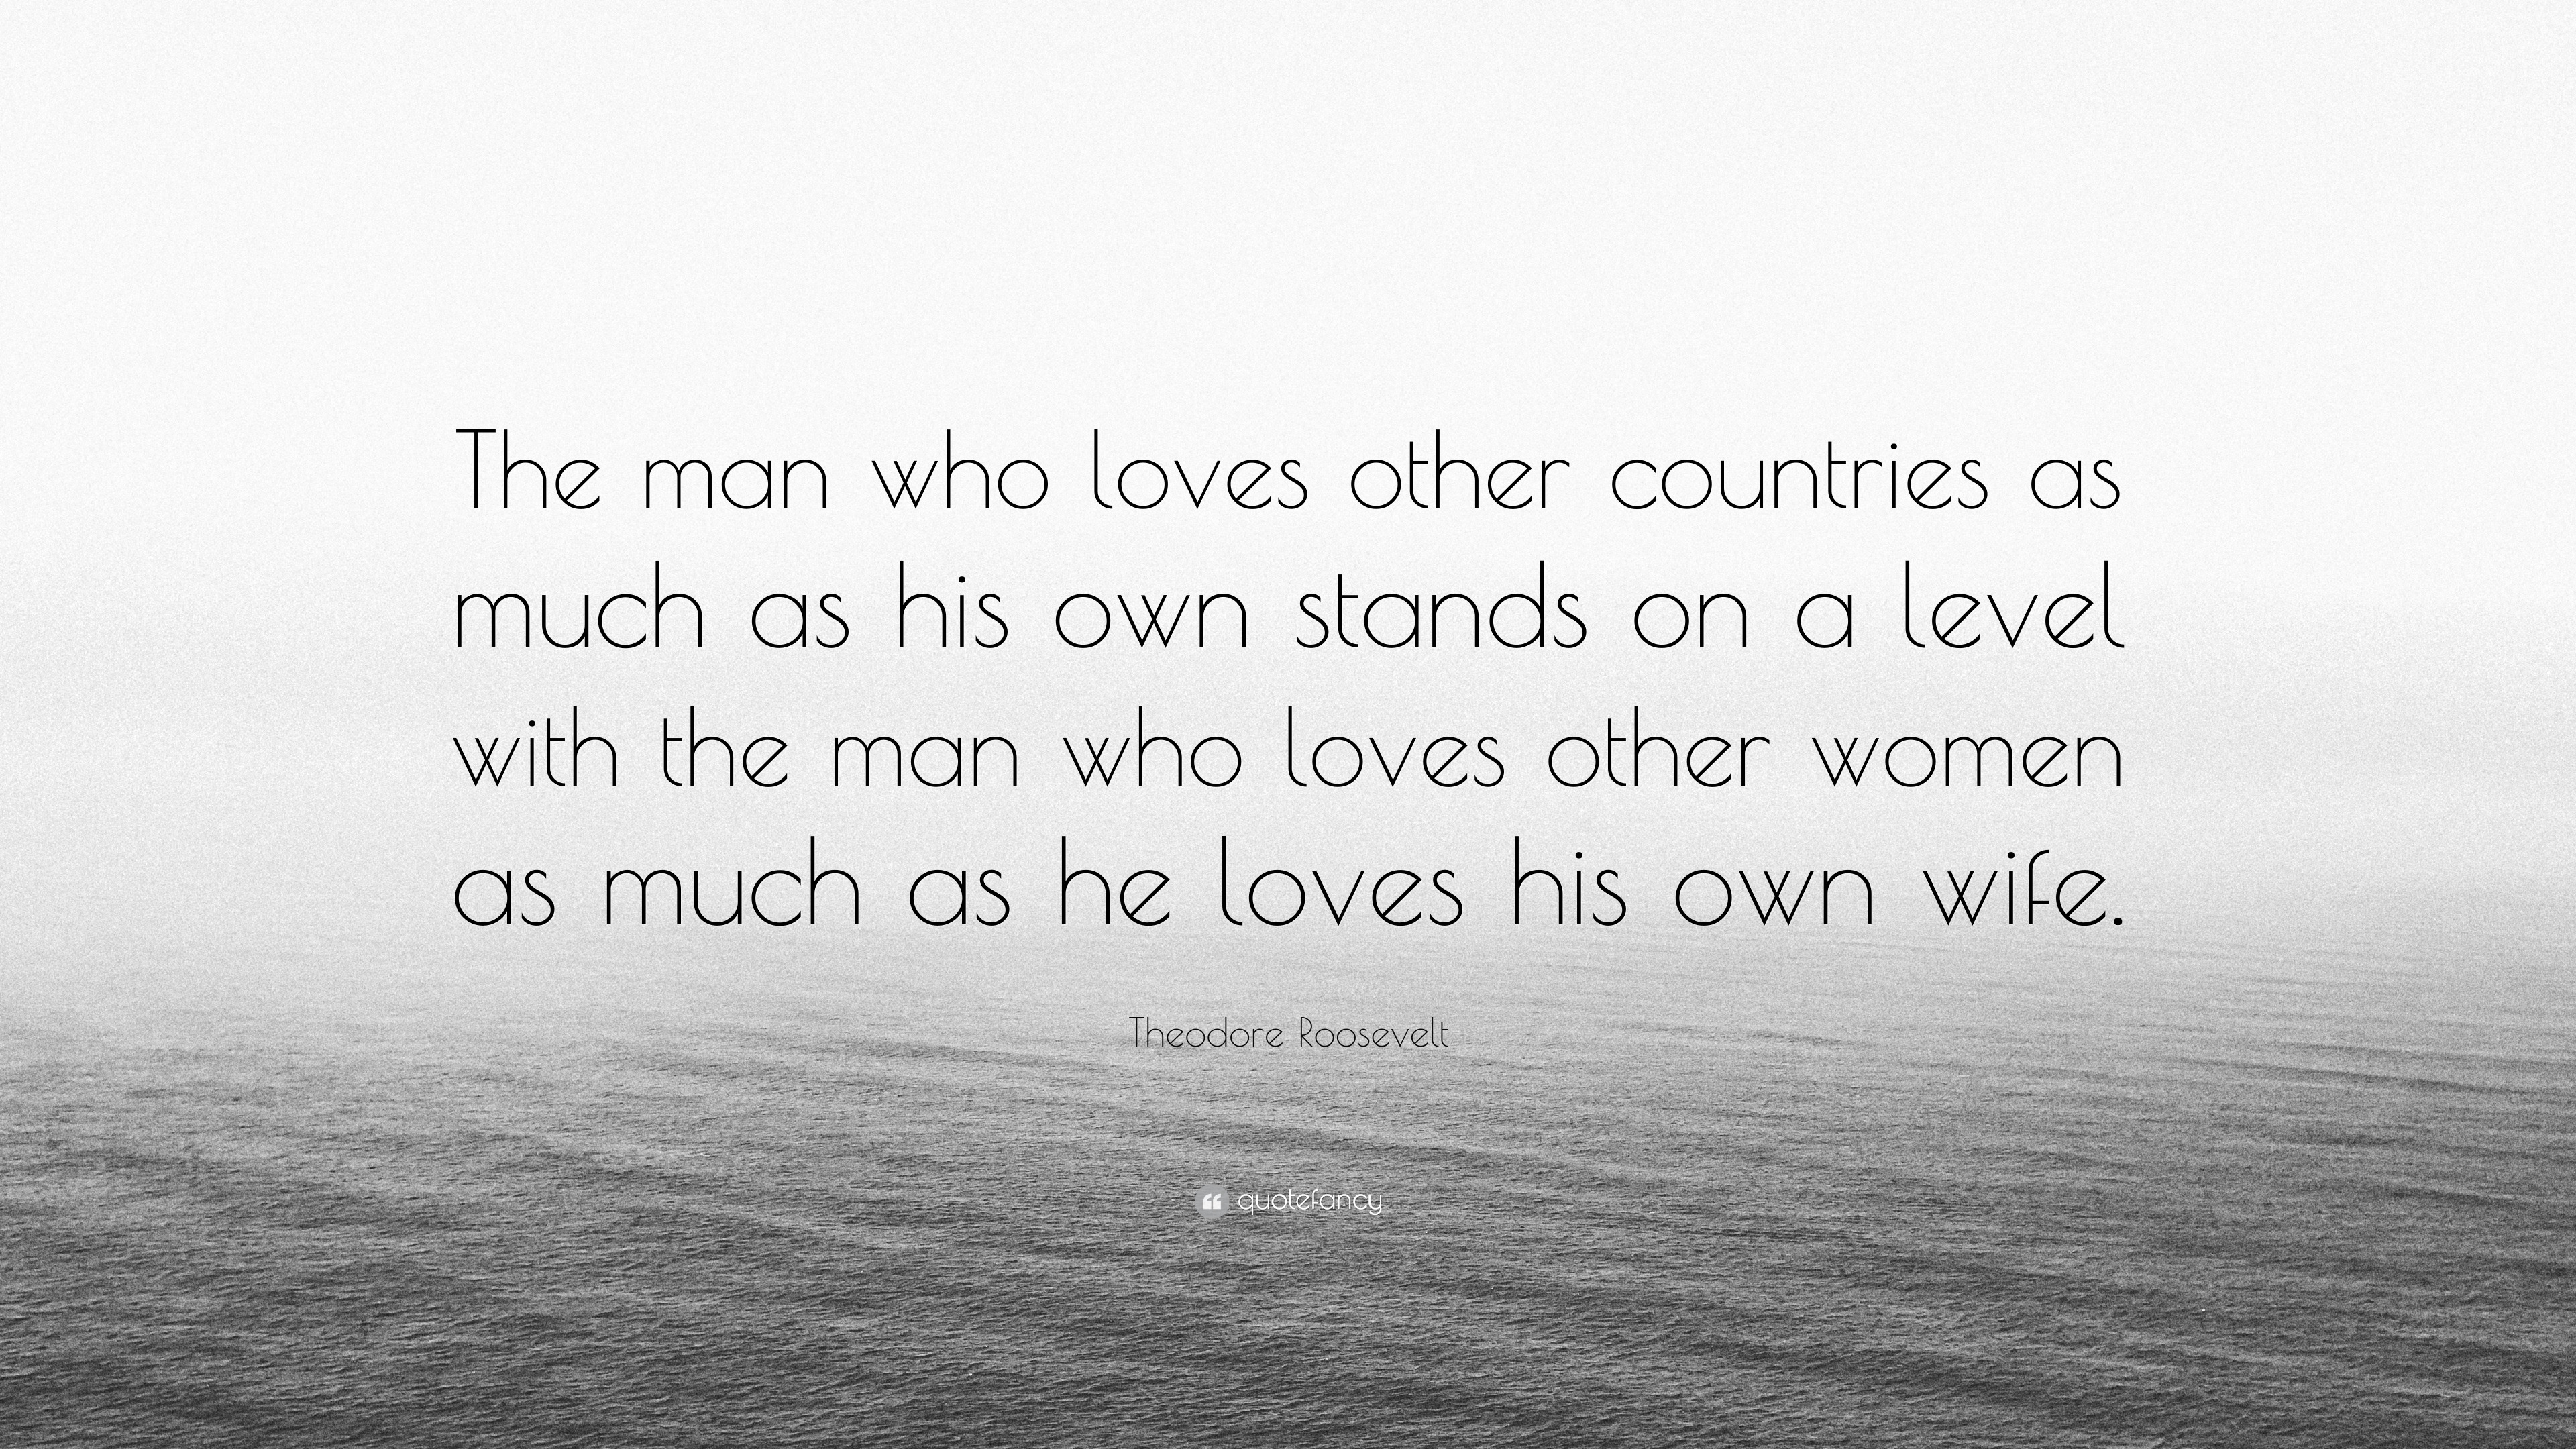 Theodore Roosevelt Quote “The man who loves other countries as much as his own